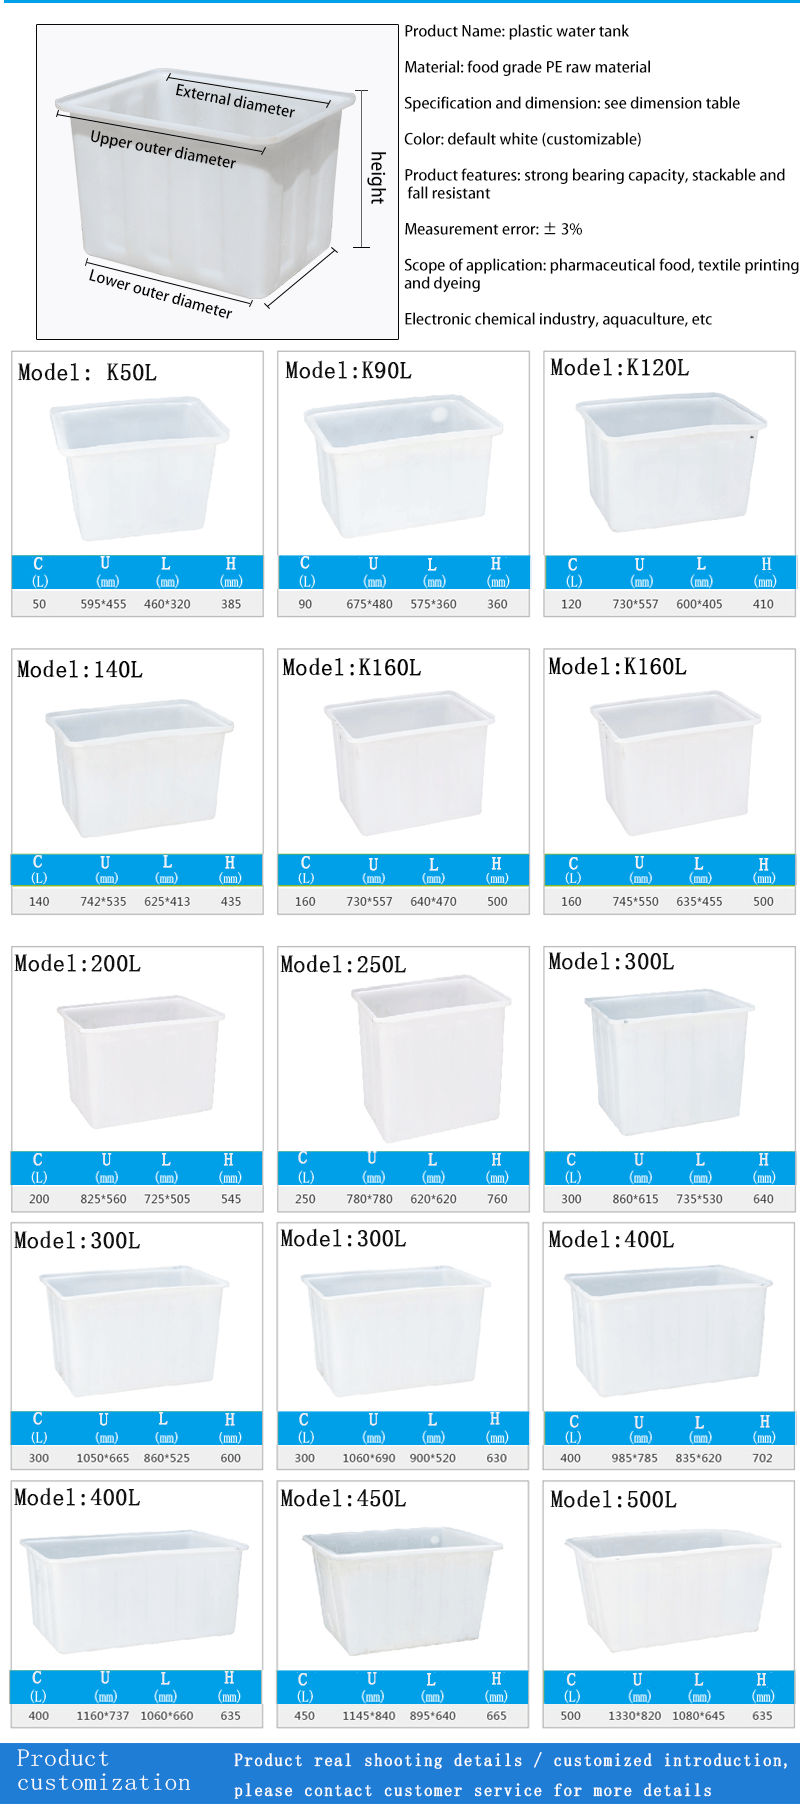 Food Grade Rectangle Poly Feed Storage Tub For Fish, Meat, Or Poultry Fresh And Organized